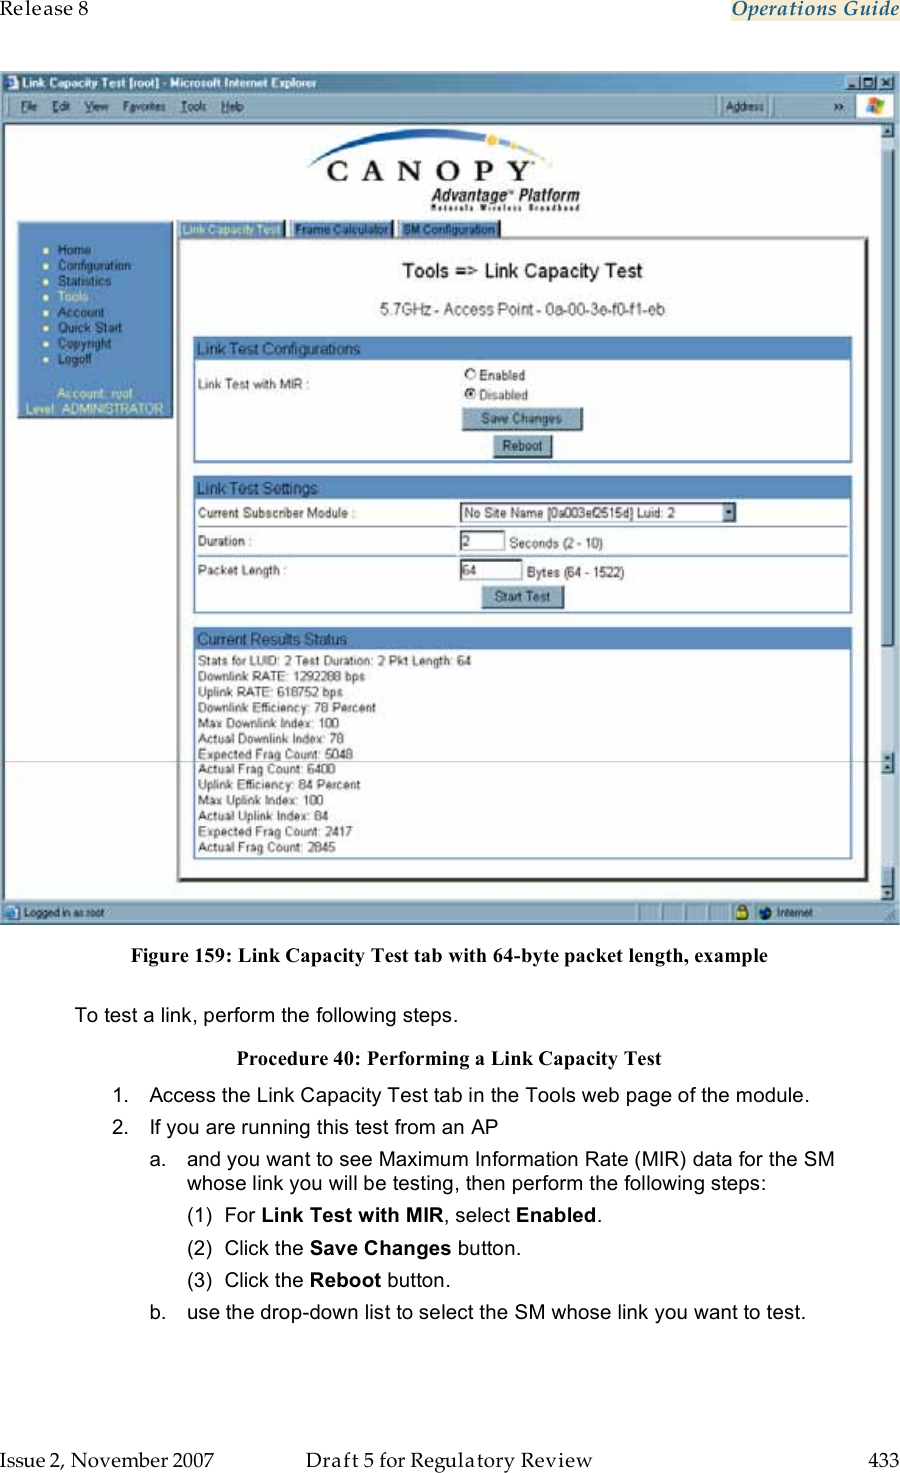 Release 8    Operations Guide   Issue 2, November 2007  Draft 5 for Regulatory Review  433      Figure 159: Link Capacity Test tab with 64-byte packet length, example  To test a link, perform the following steps. Procedure 40: Performing a Link Capacity Test 1.  Access the Link Capacity Test tab in the Tools web page of the module. 2.  If you are running this test from an AP a.  and you want to see Maximum Information Rate (MIR) data for the SM whose link you will be testing, then perform the following steps: (1)  For Link Test with MIR, select Enabled. (2)  Click the Save Changes button. (3)  Click the Reboot button.  b.  use the drop-down list to select the SM whose link you want to test. 